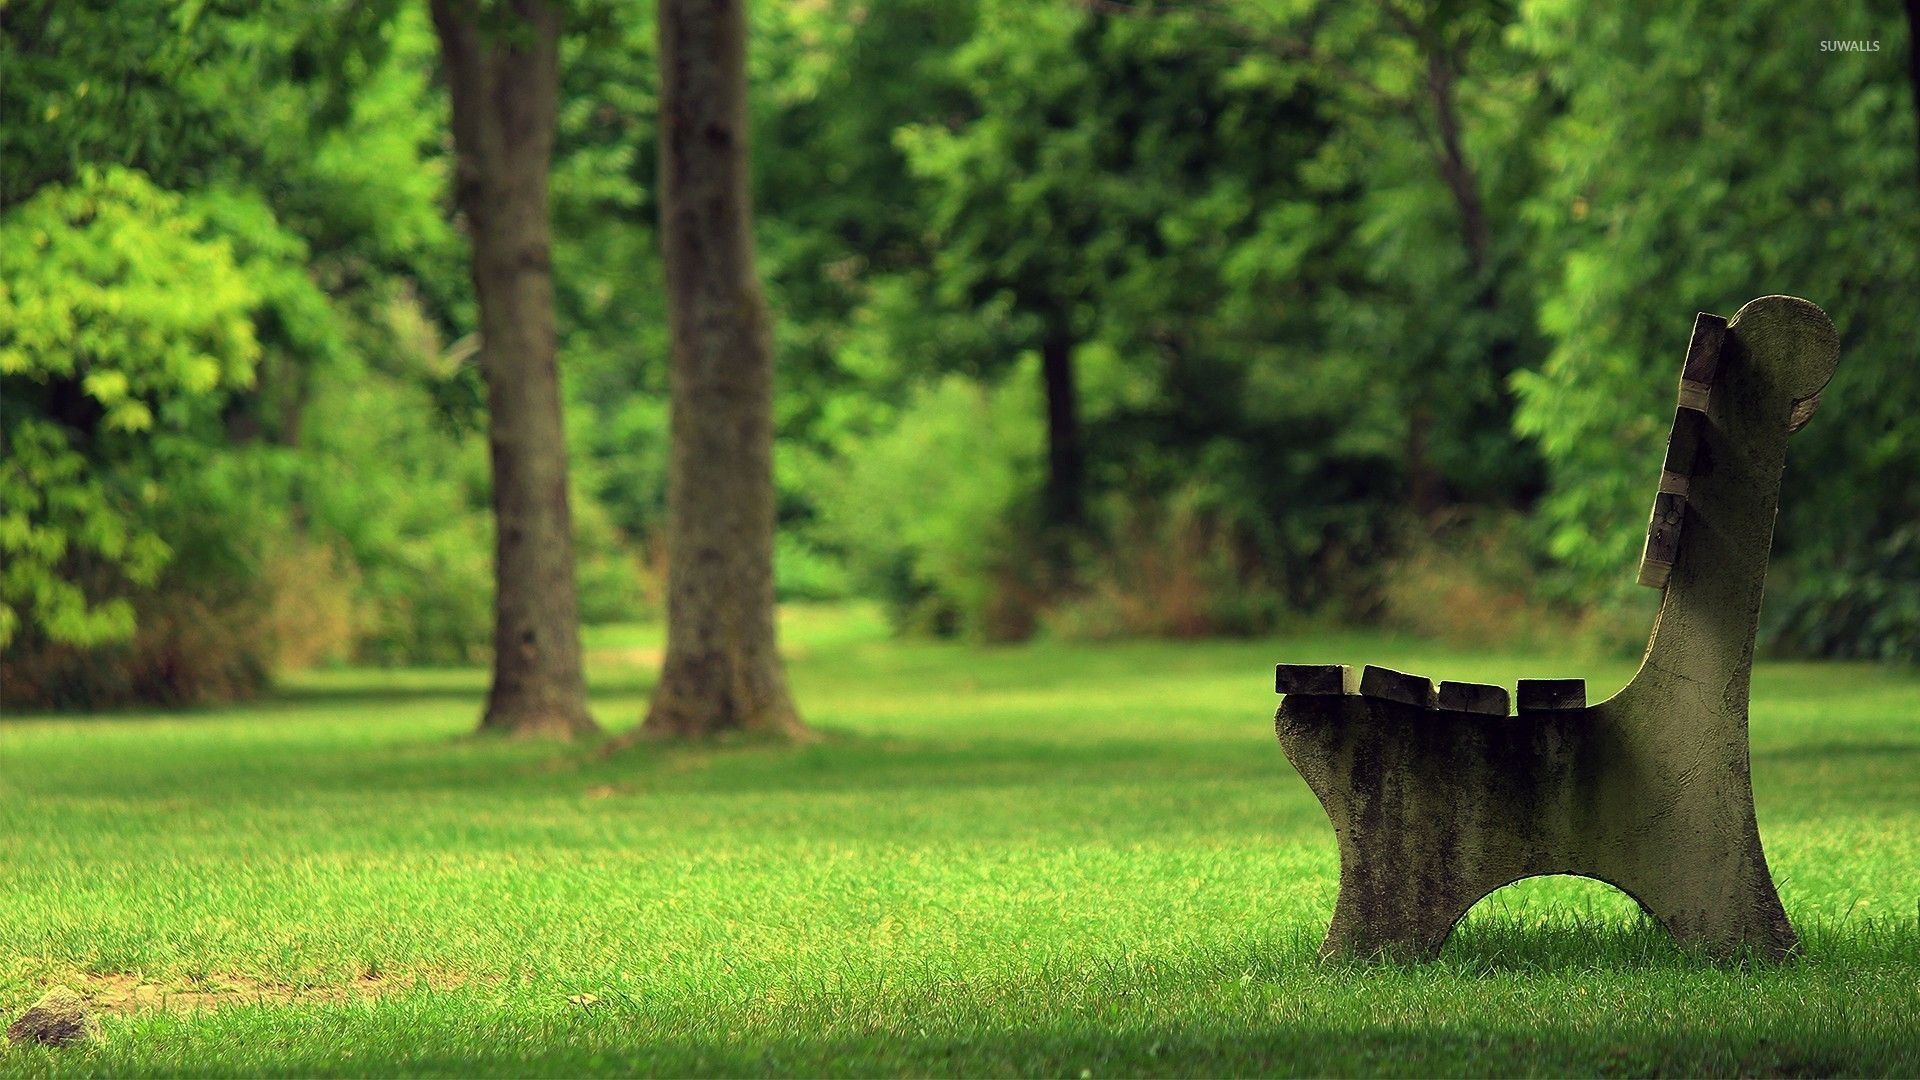 Bench in the park [2] wallpaper - Nature wallpapers - #53617